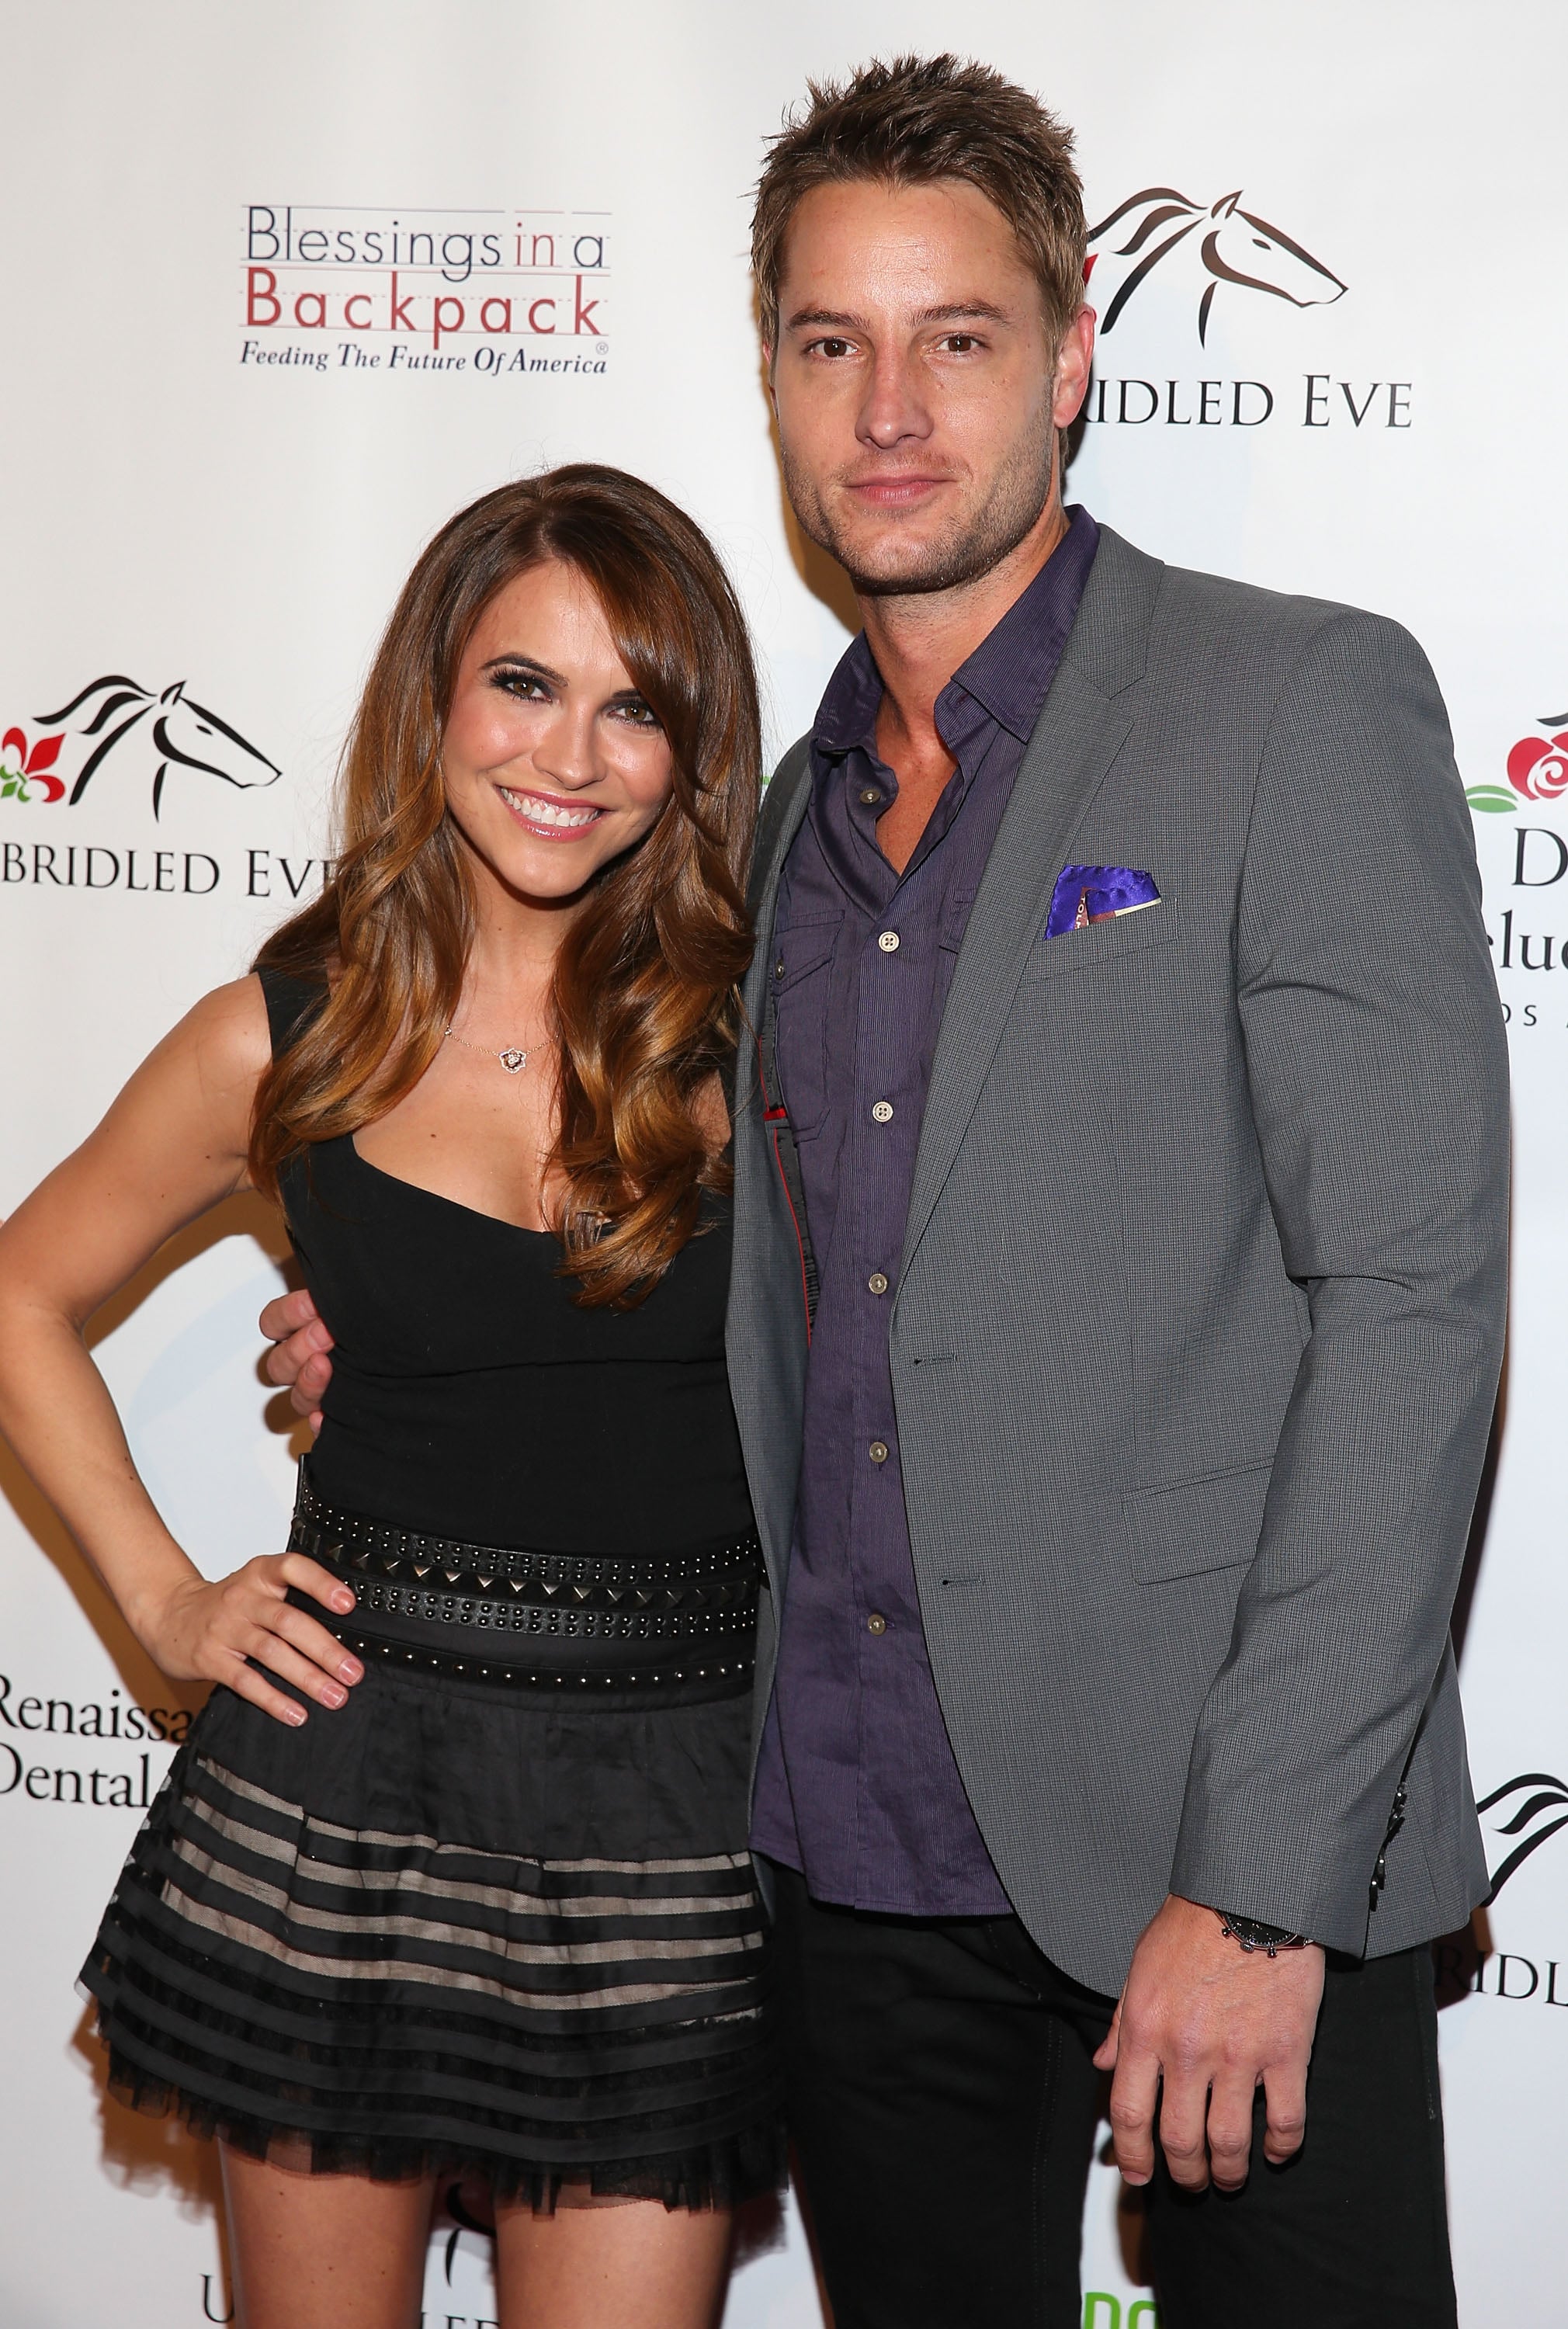 Chrishell Stause on finding 'closure' after Justin Hartley remarried